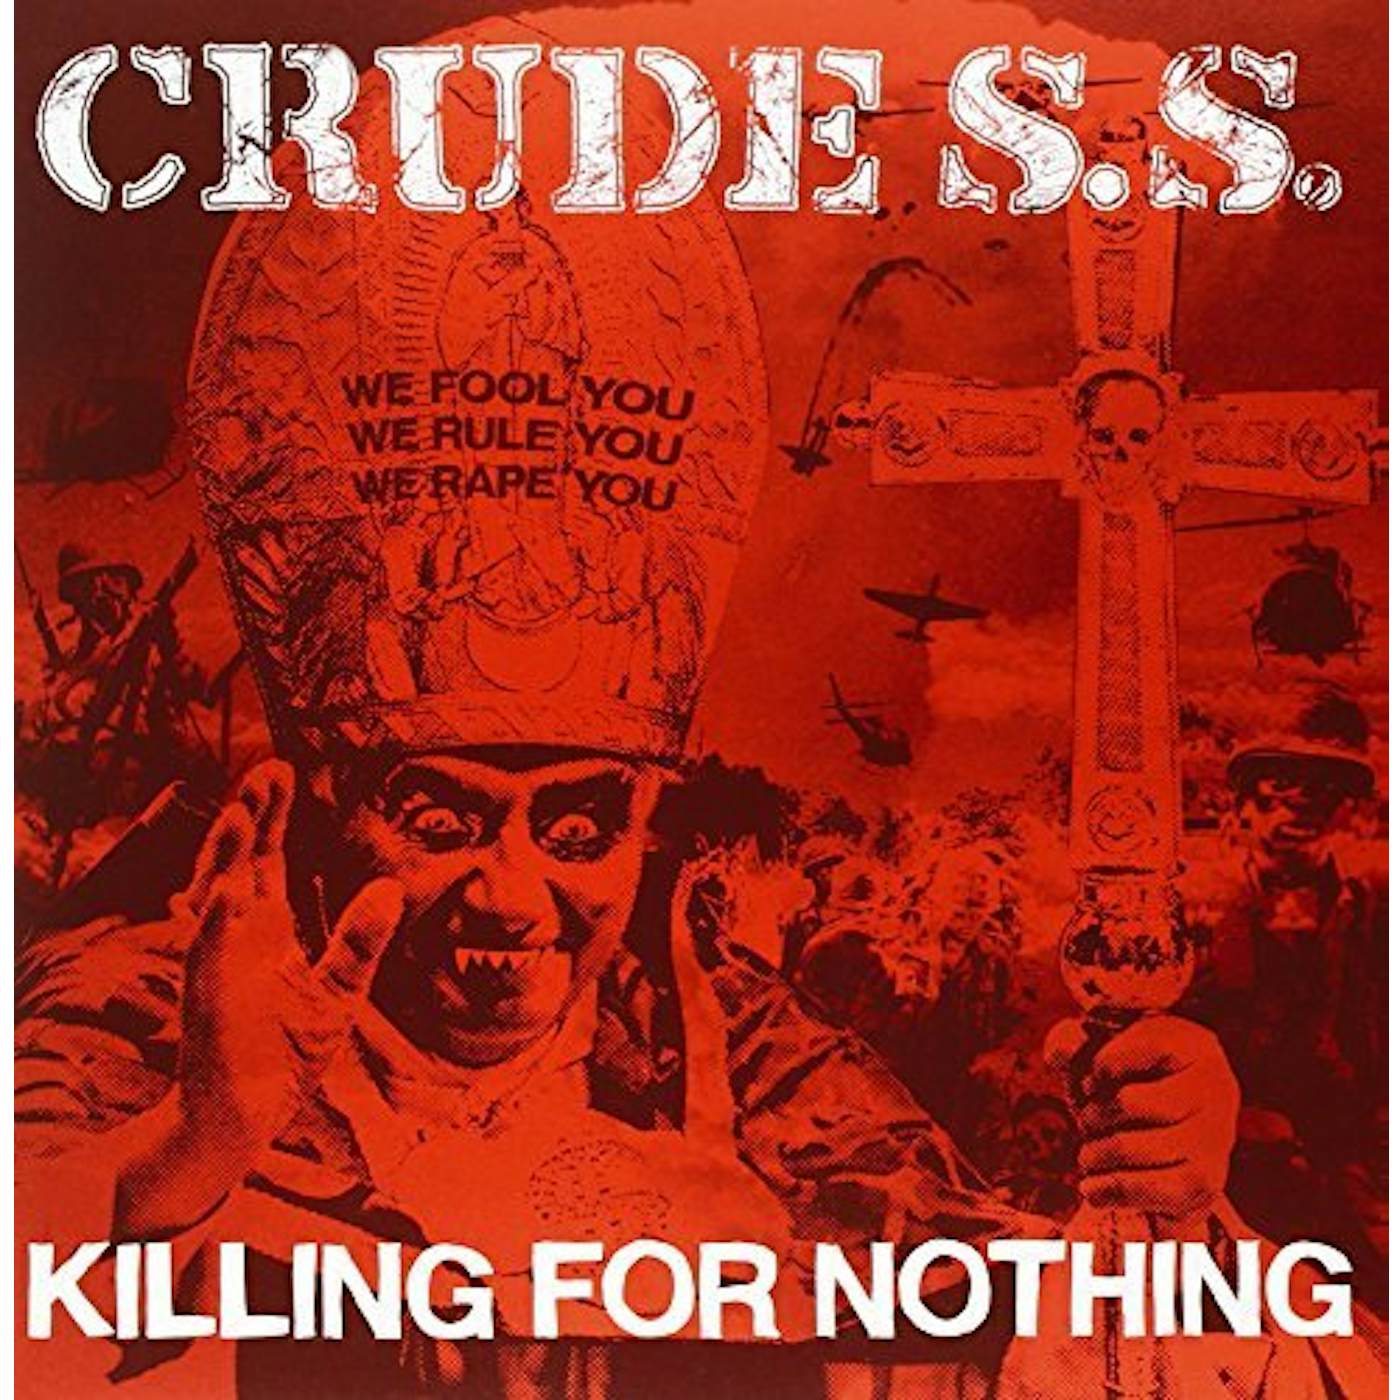 Crude SS Killing For Nothing Vinyl Record